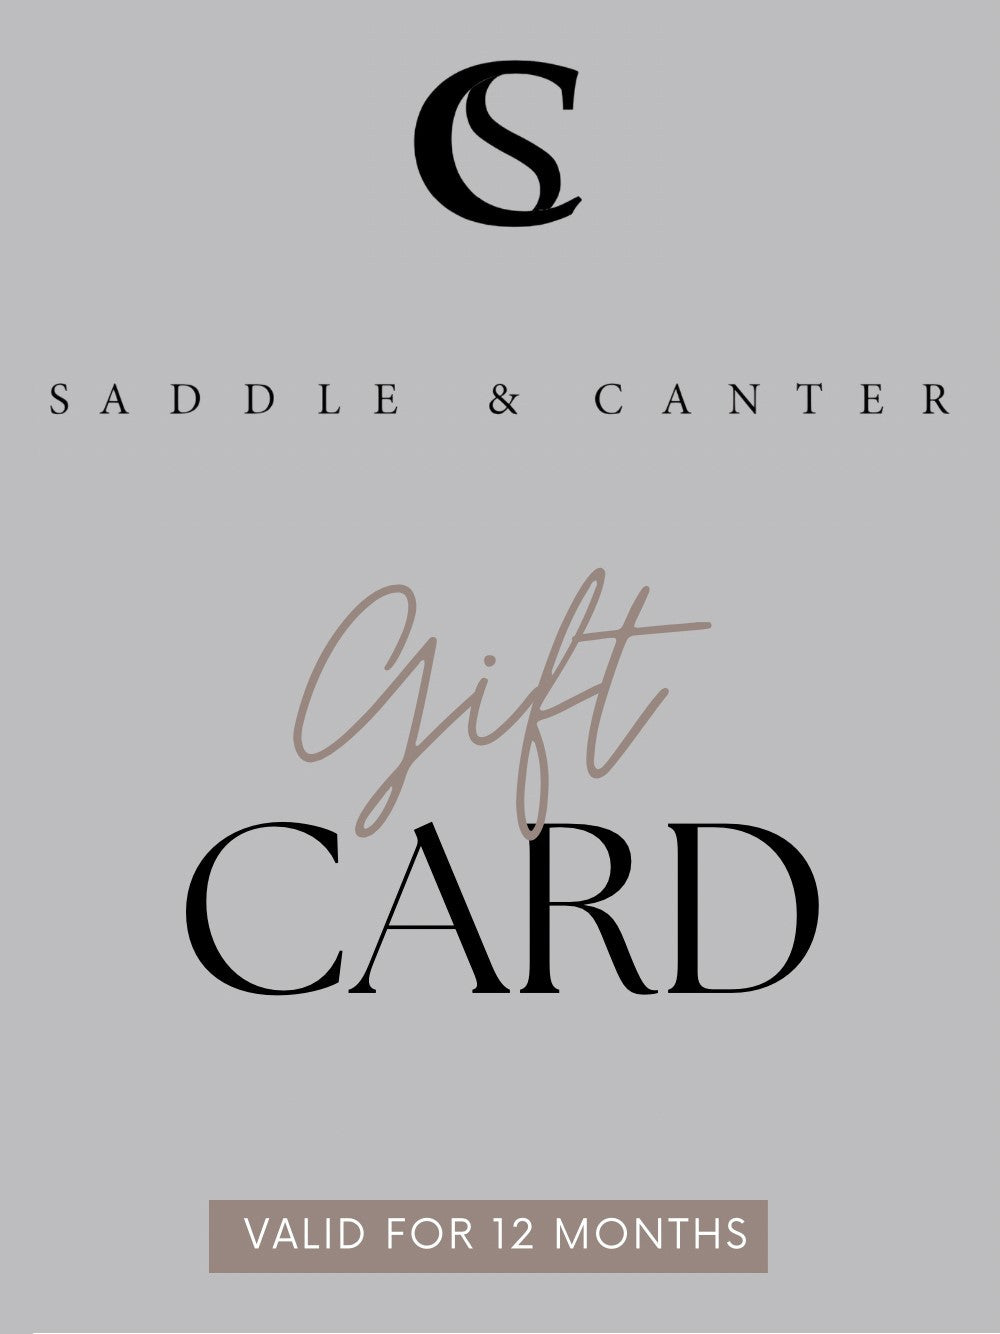 Saddle & Canter Gift Card. Online Gift Cards for Horse Rider Gifts